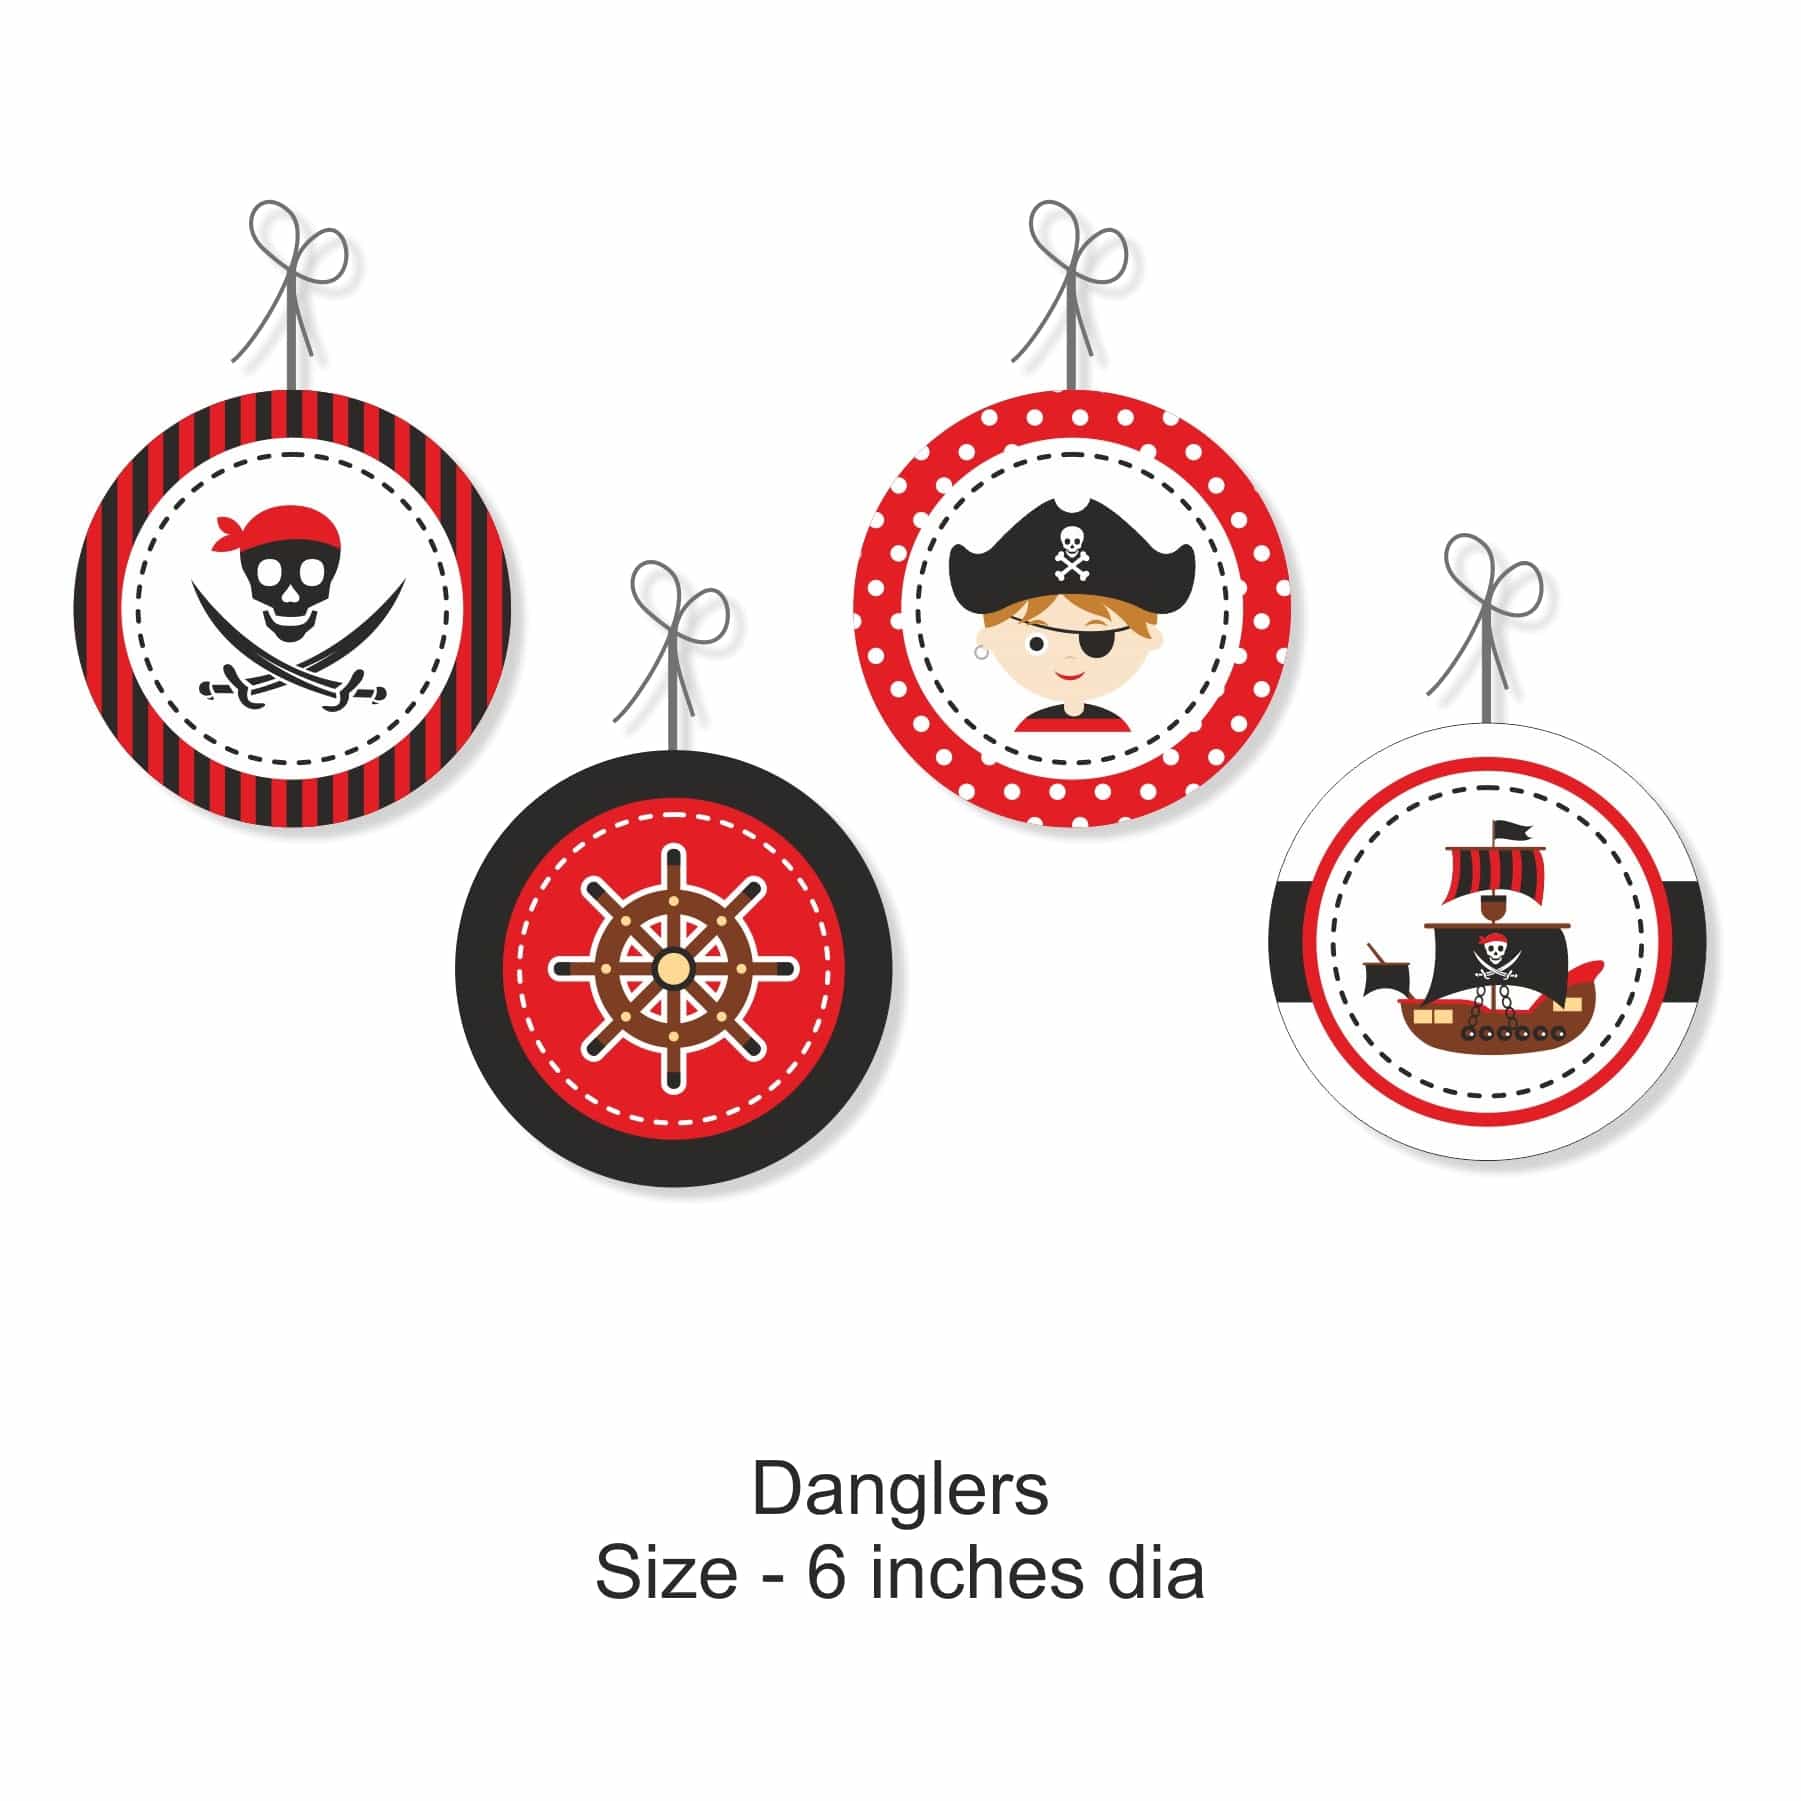  Ready Confetti 12 pk Pirate Party Favors for Pirate